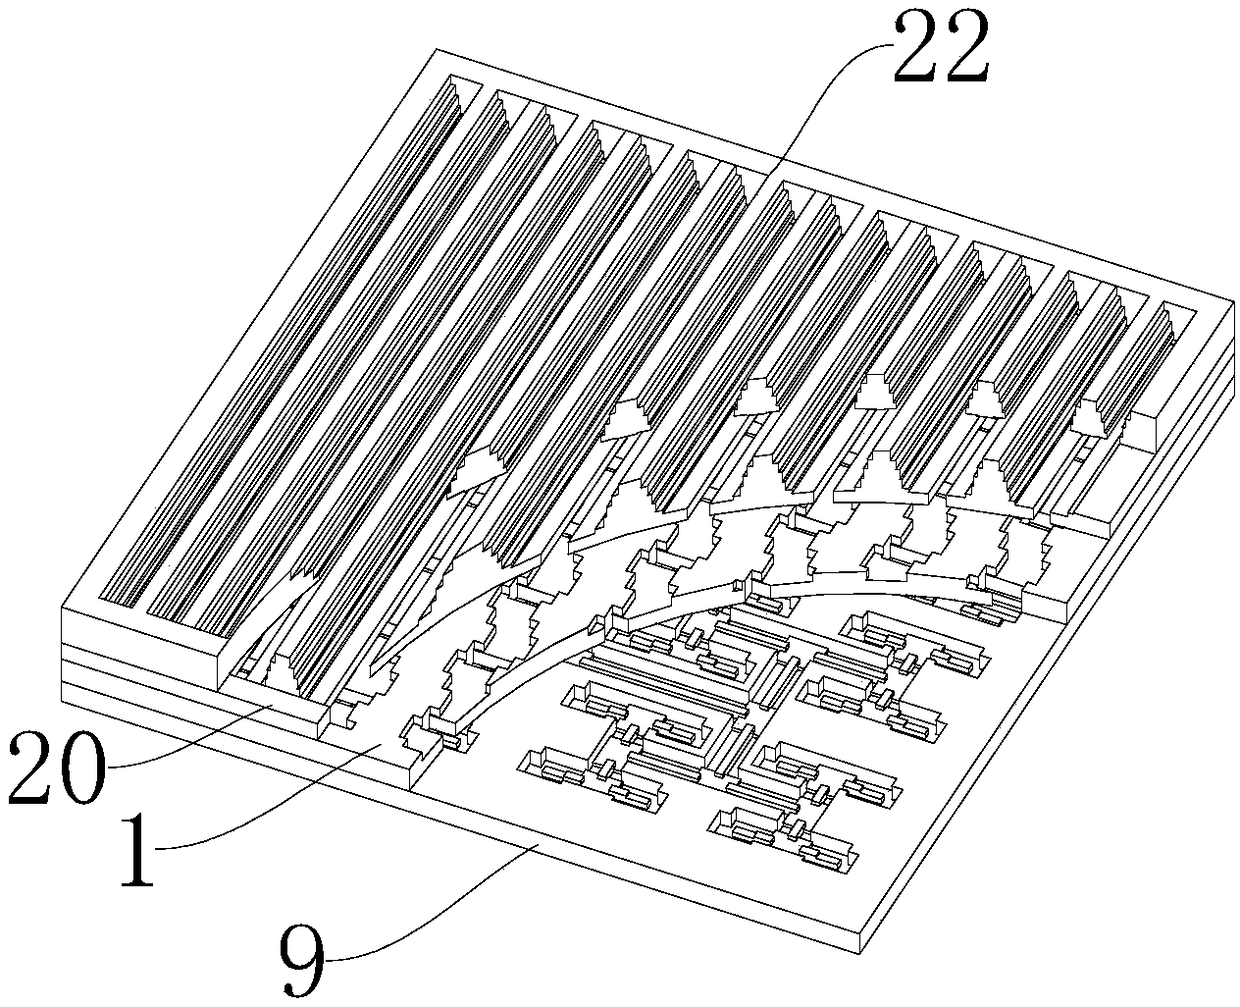 A low-profile CTS plate array antenna